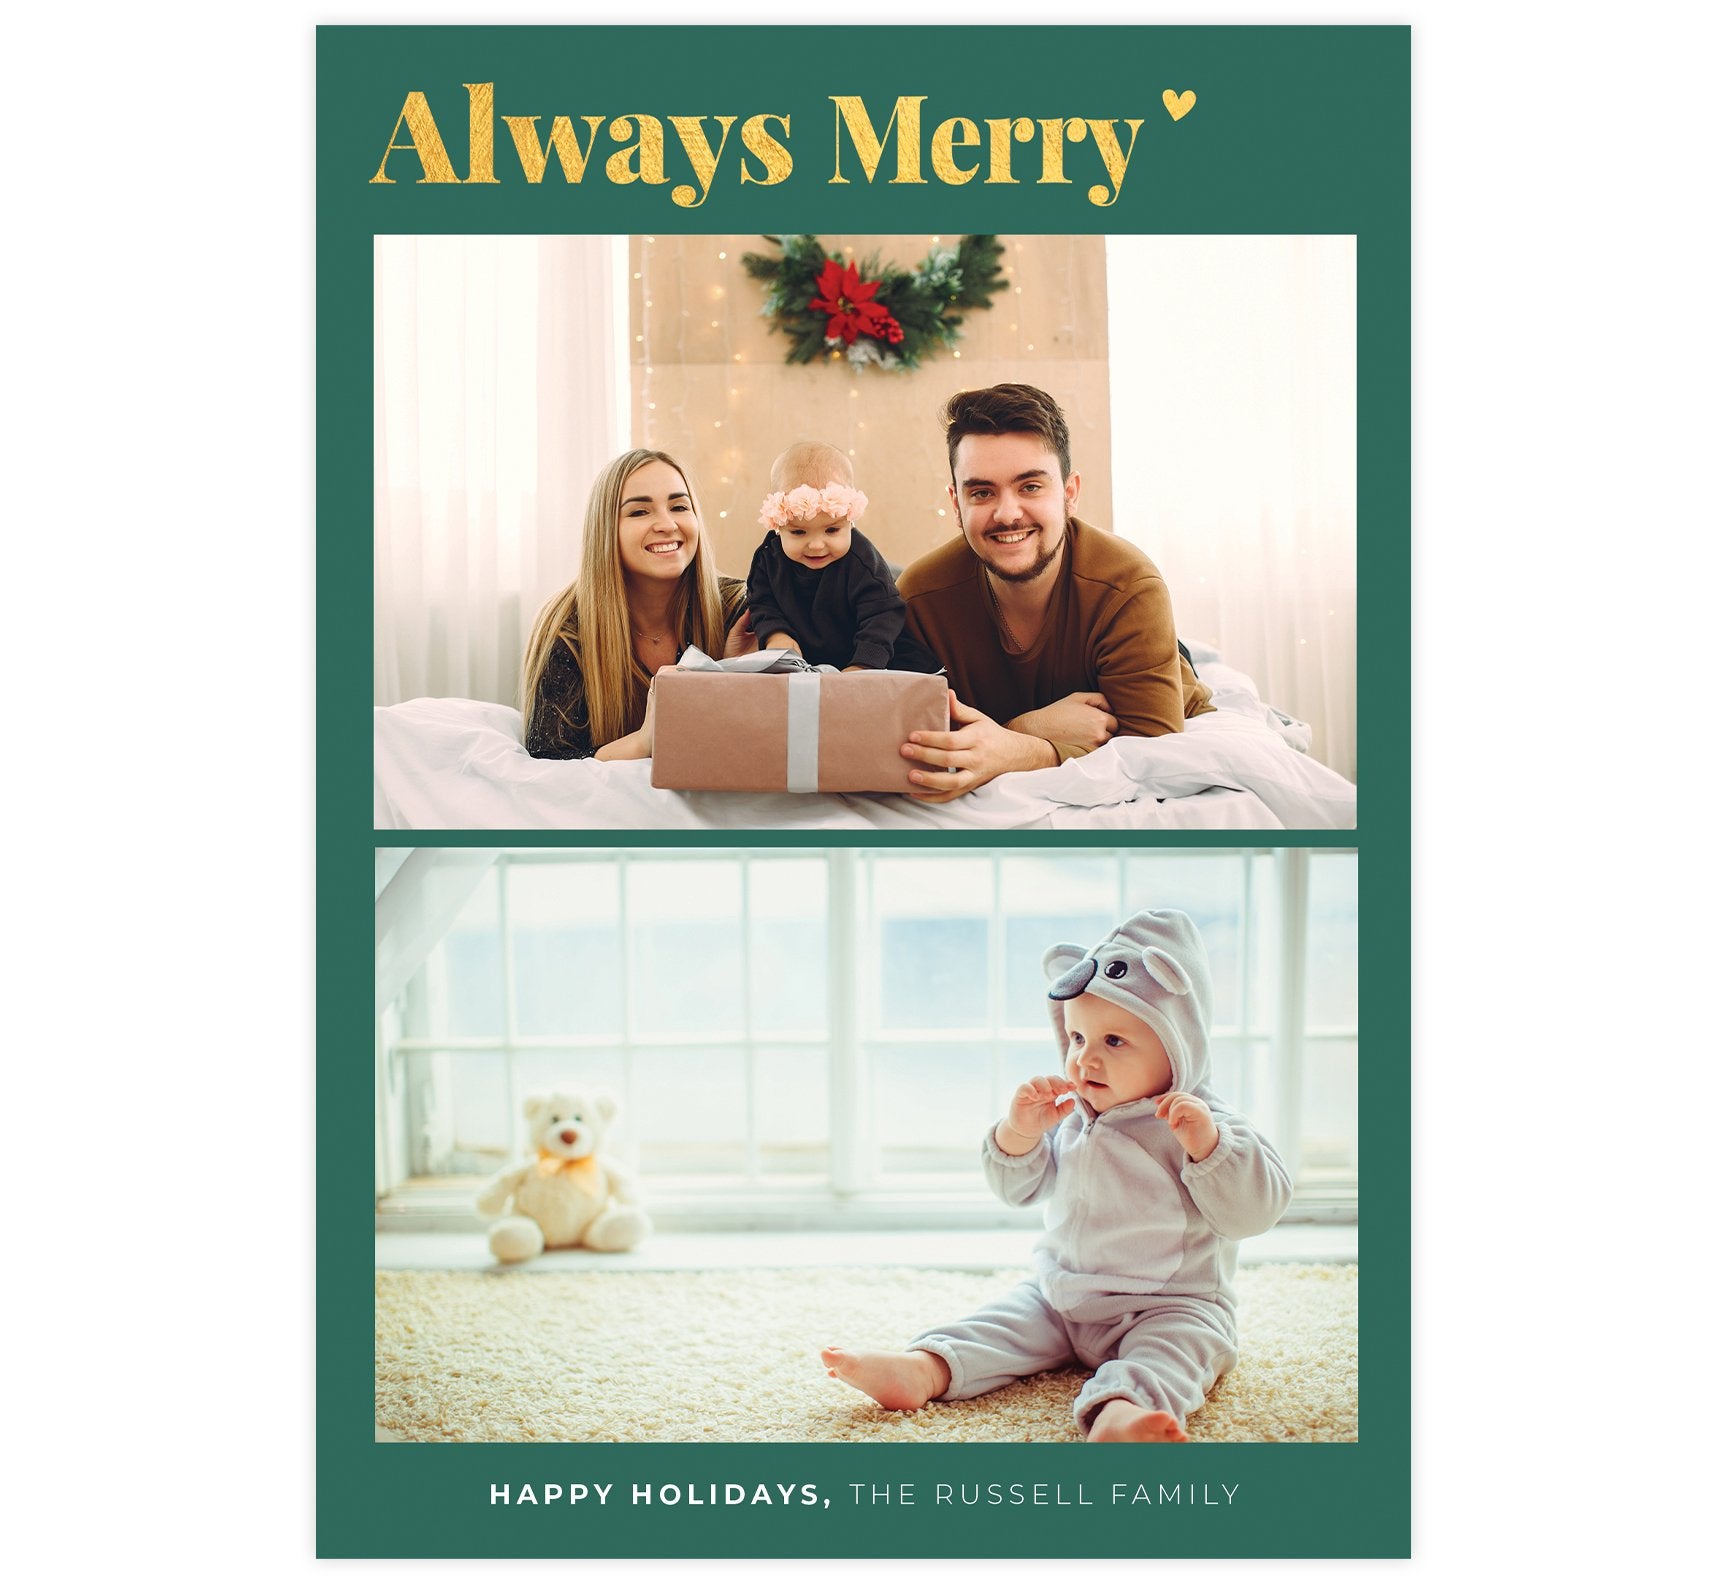 Always Merry Holiday Card; Muted blue/green background with gold "always merry" at the top, 2 image spaces and names at the bottom